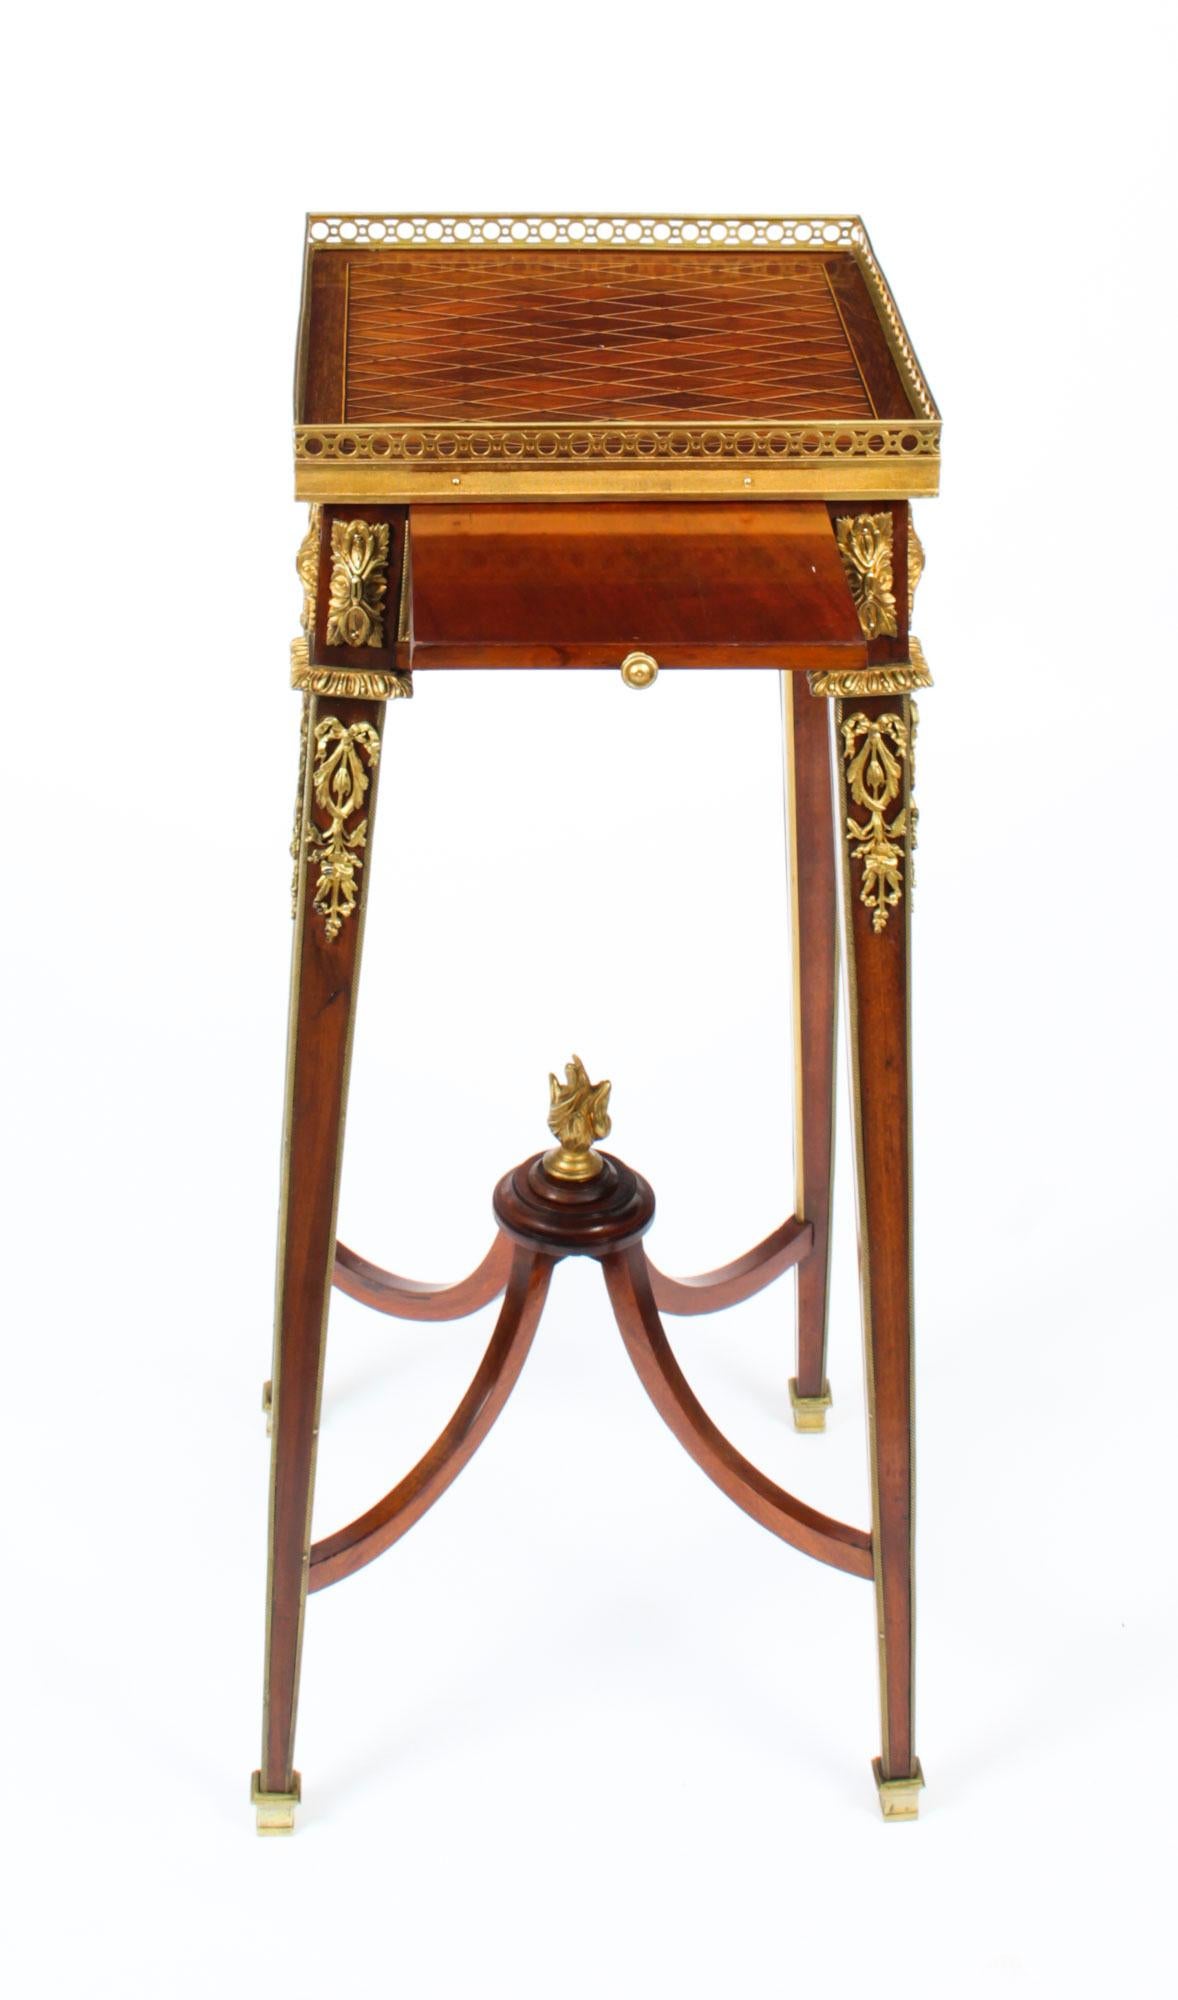 Antique French Parquetry Ormolu Mounted Stand Att François Linke, 19th Century For Sale 12